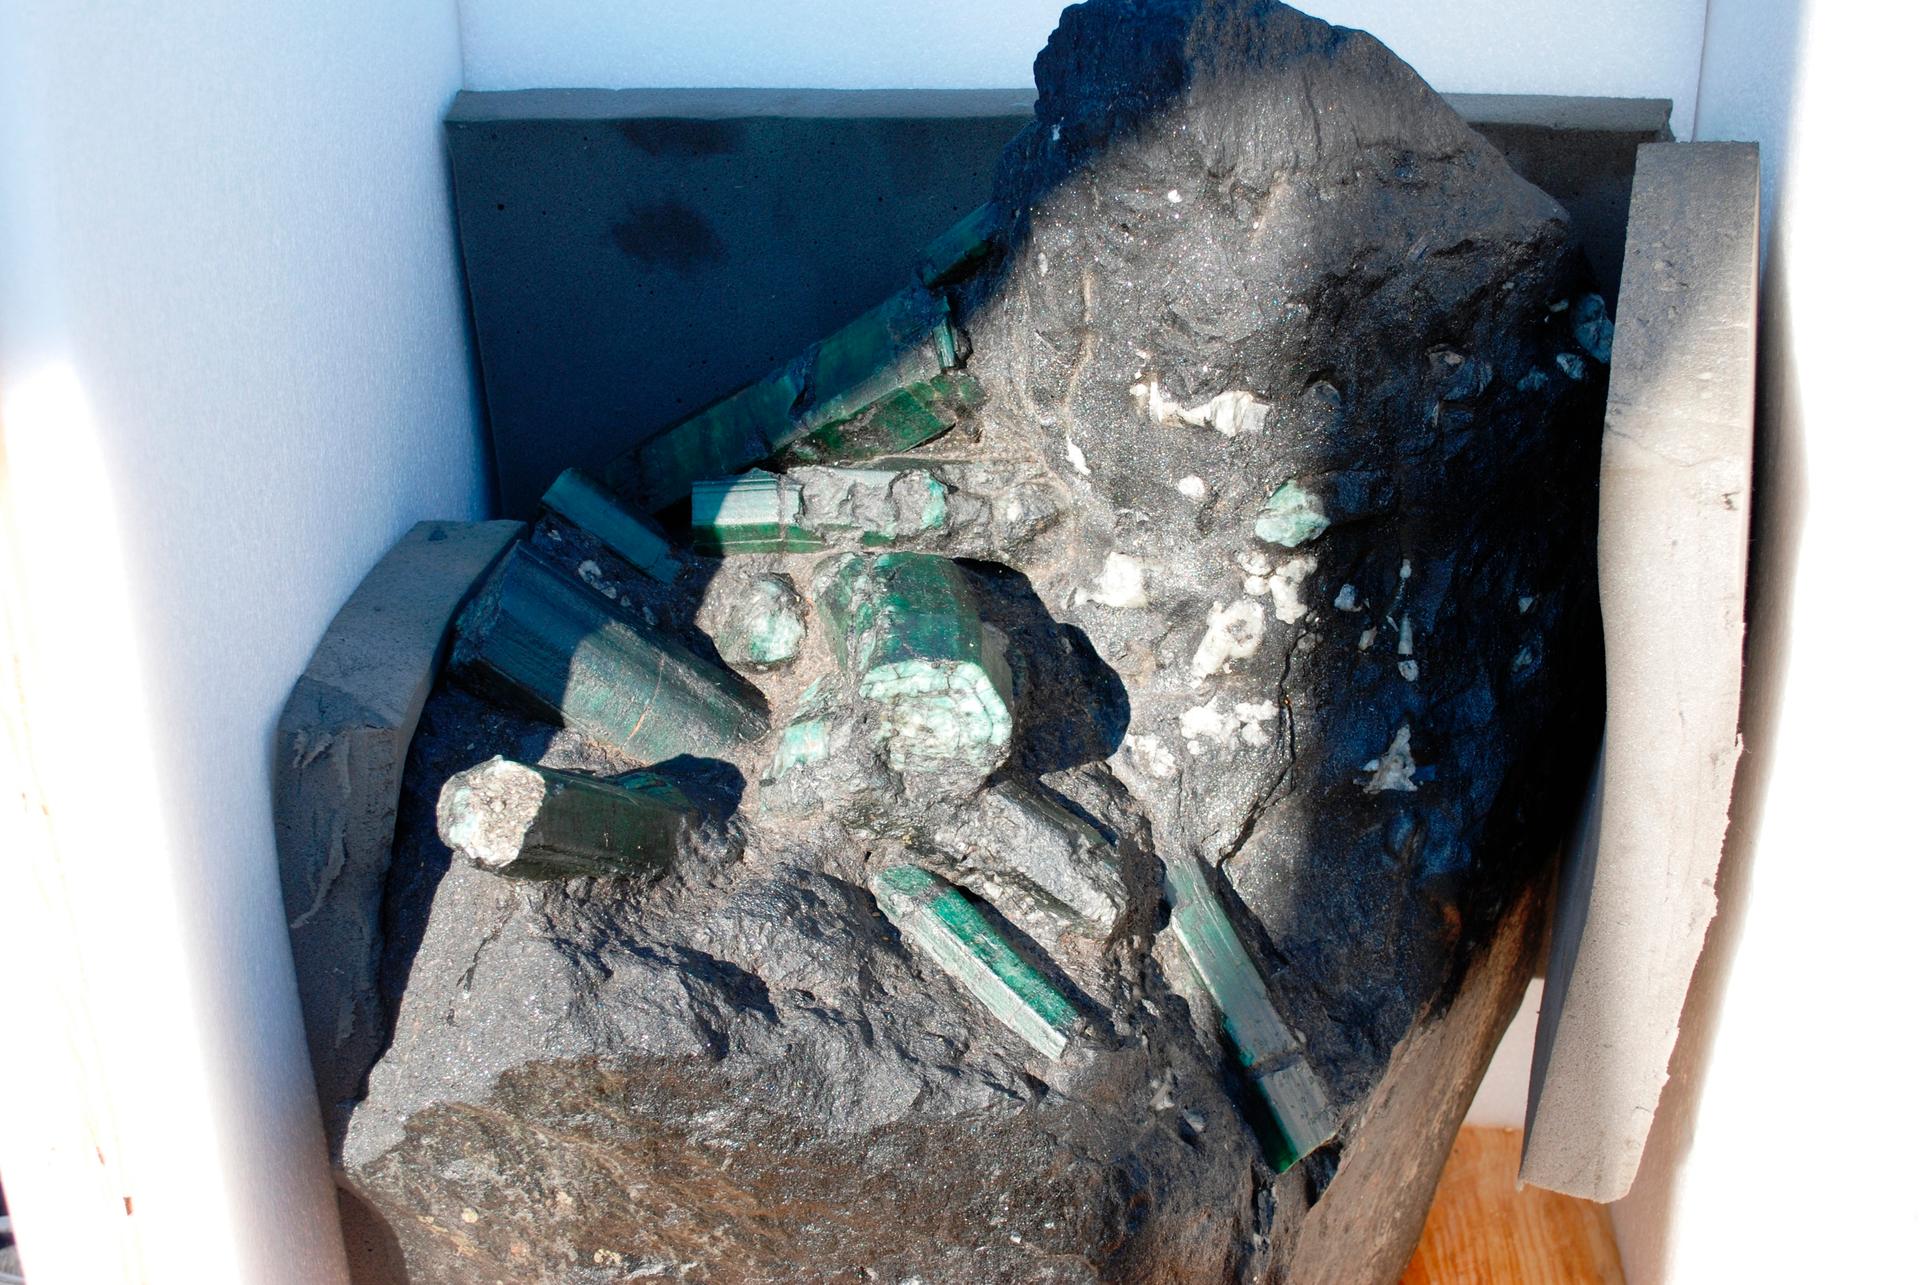 The Bahia Emerald, shown in 2008. The gem, valued upwards of $400 million, is the subject of an custody battle being heard in a Los Angeles court.